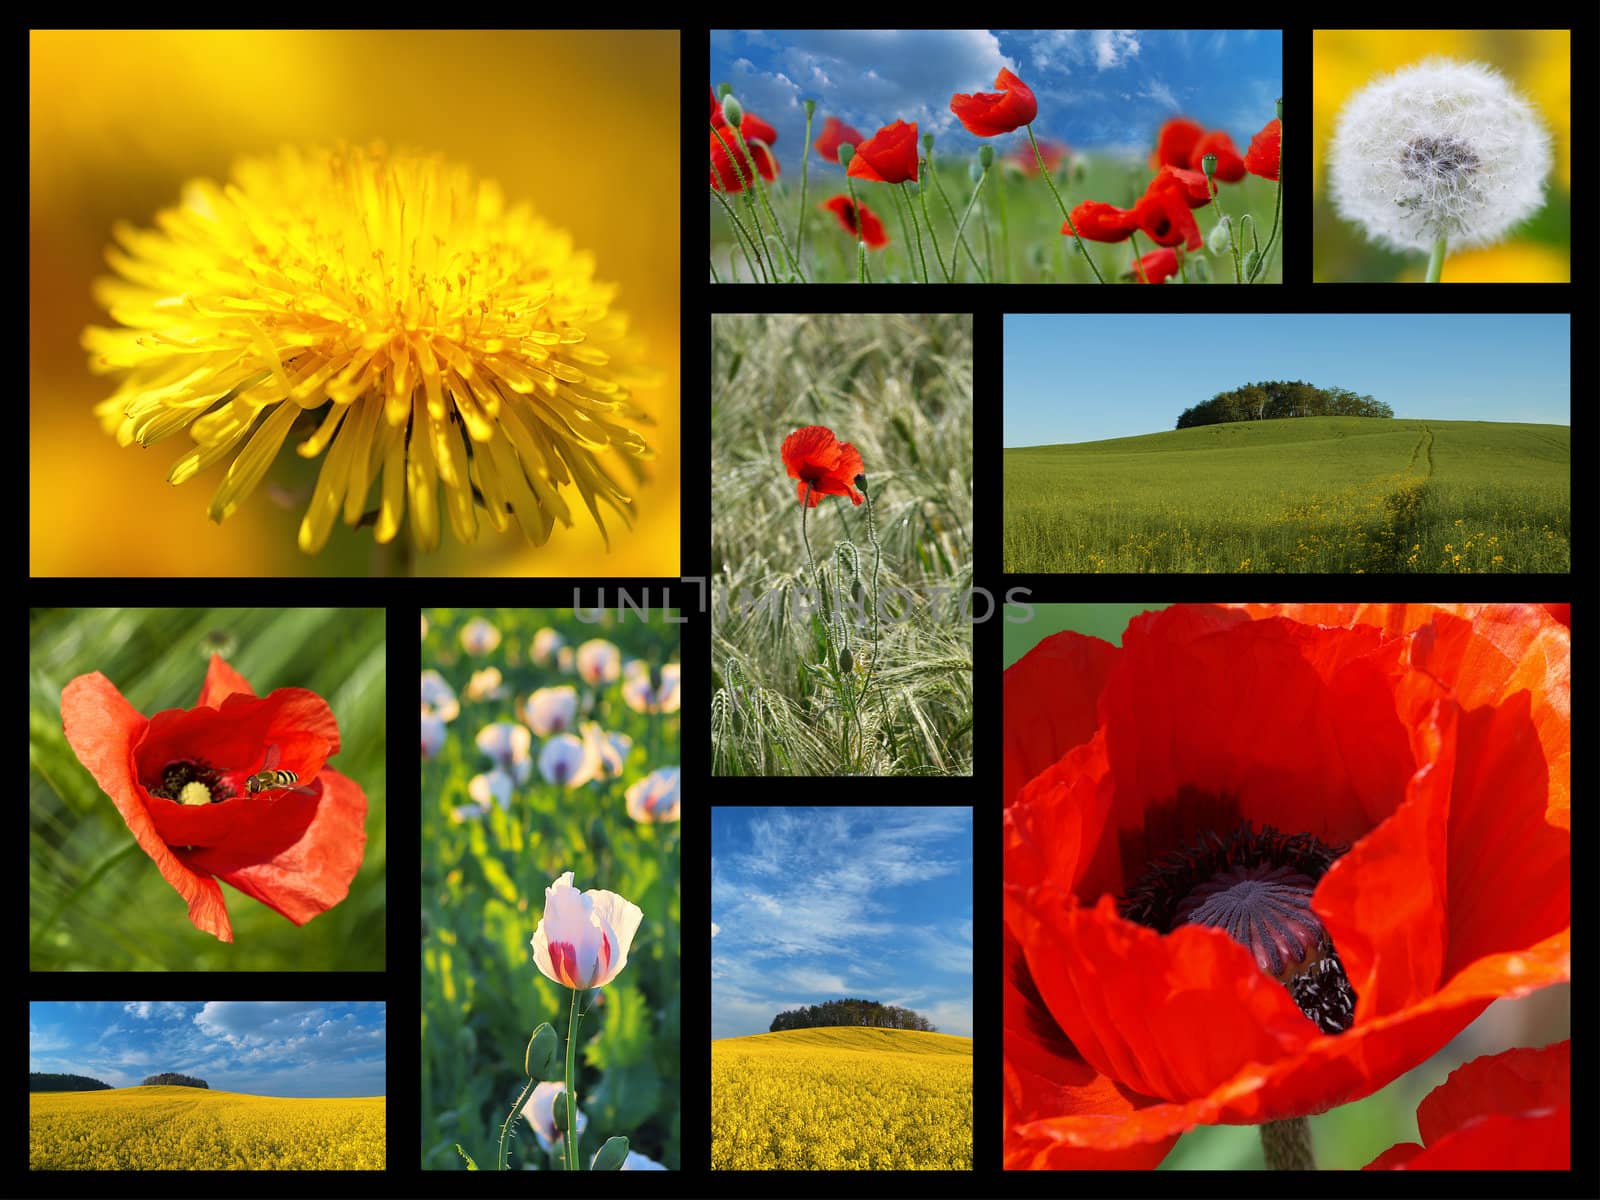 A collage of photos from the summer flowers. Poppy, dandelion, rape